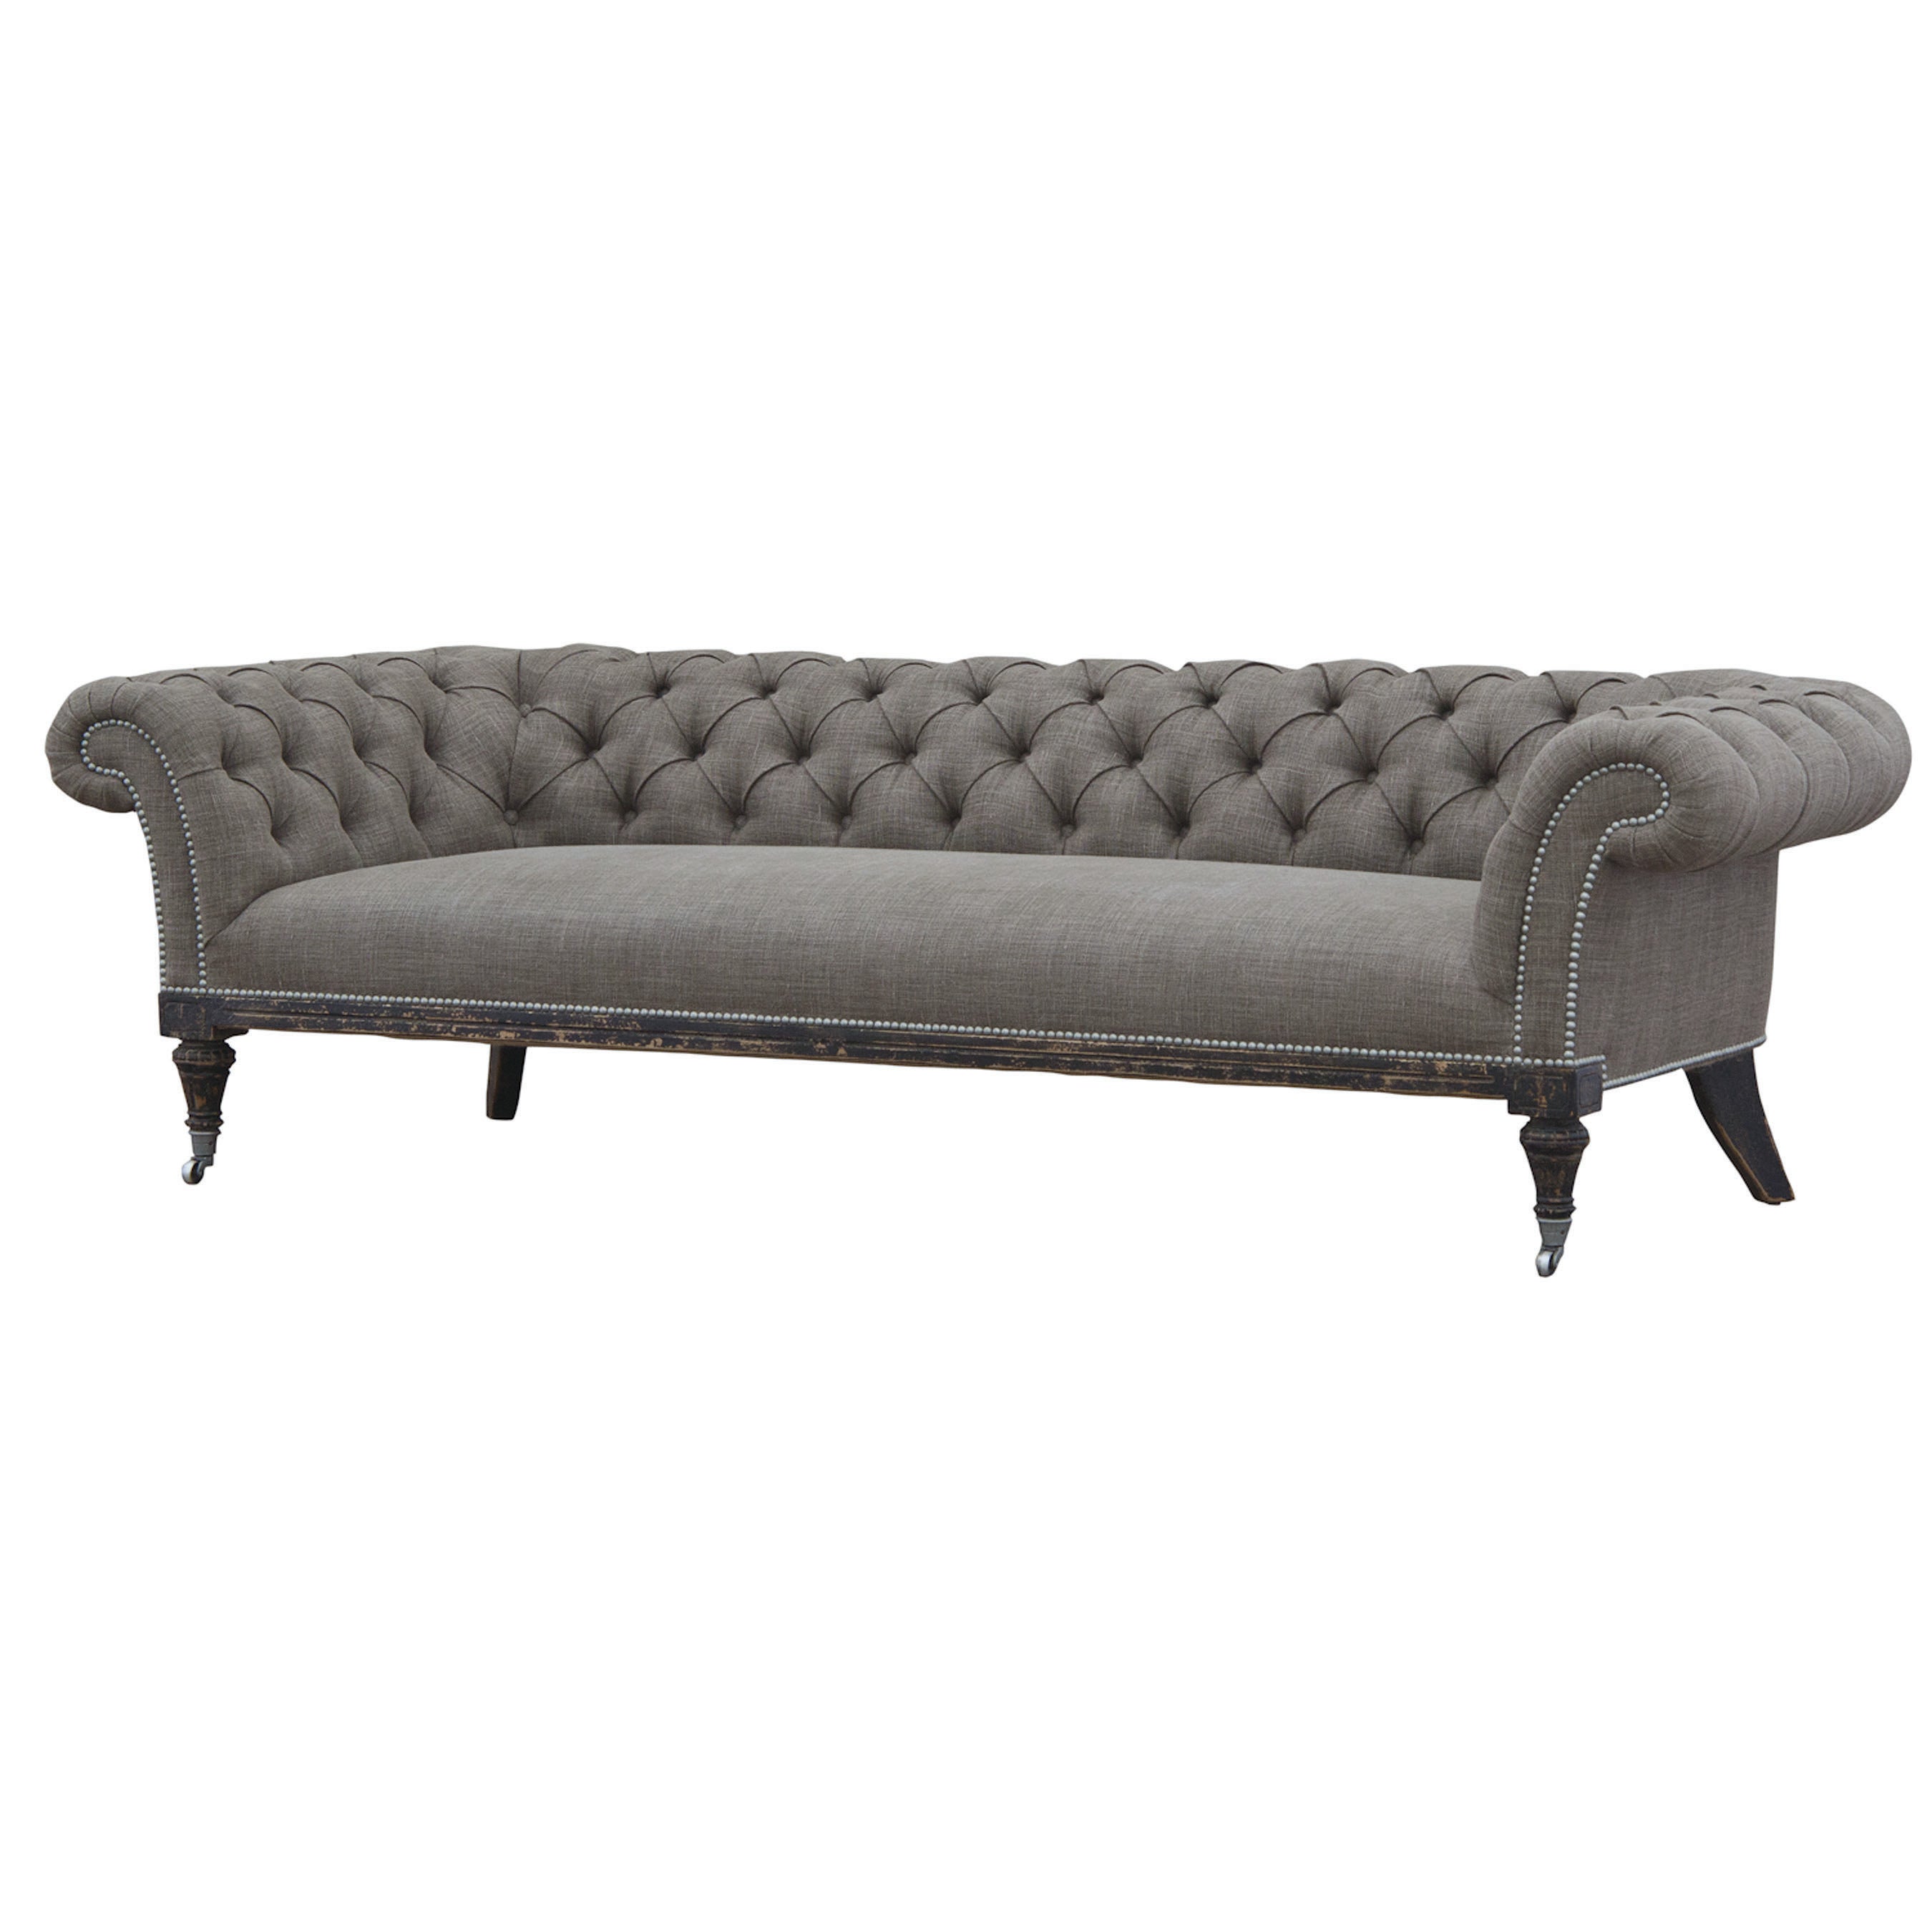 Chesterfield Sofa For Sale